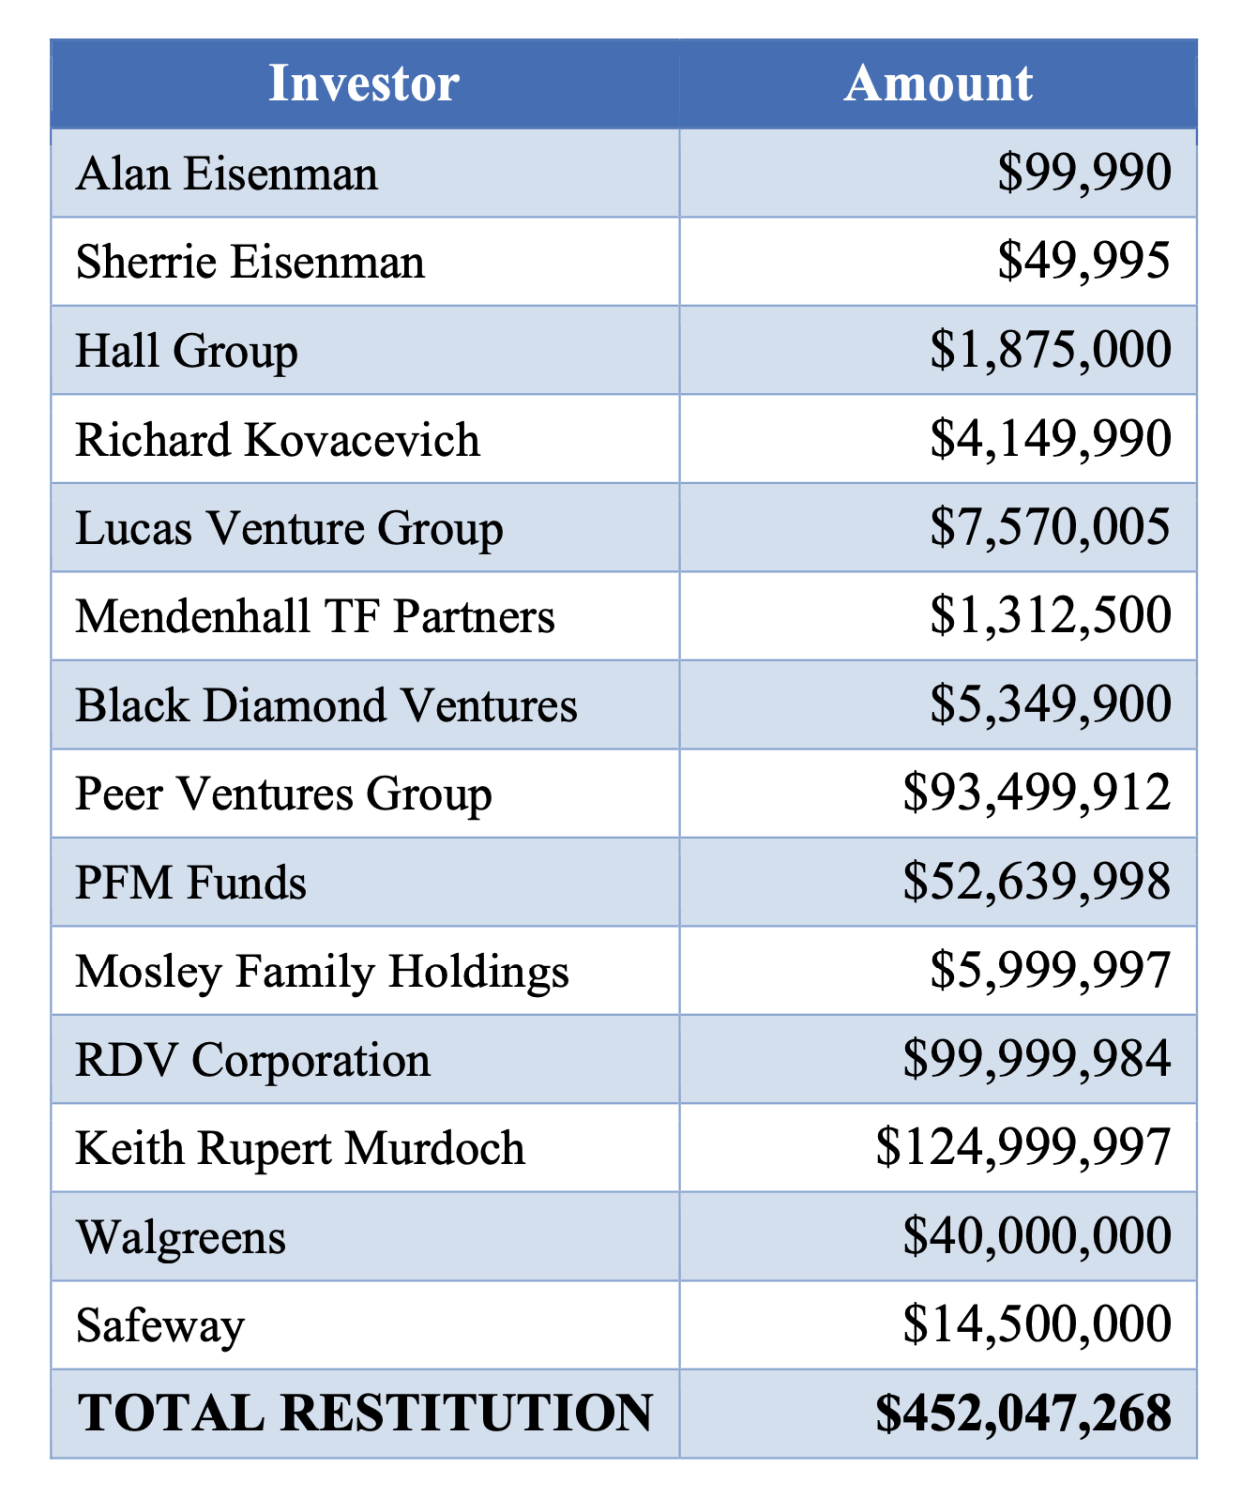 Losses for investors defrauded by Theranos.